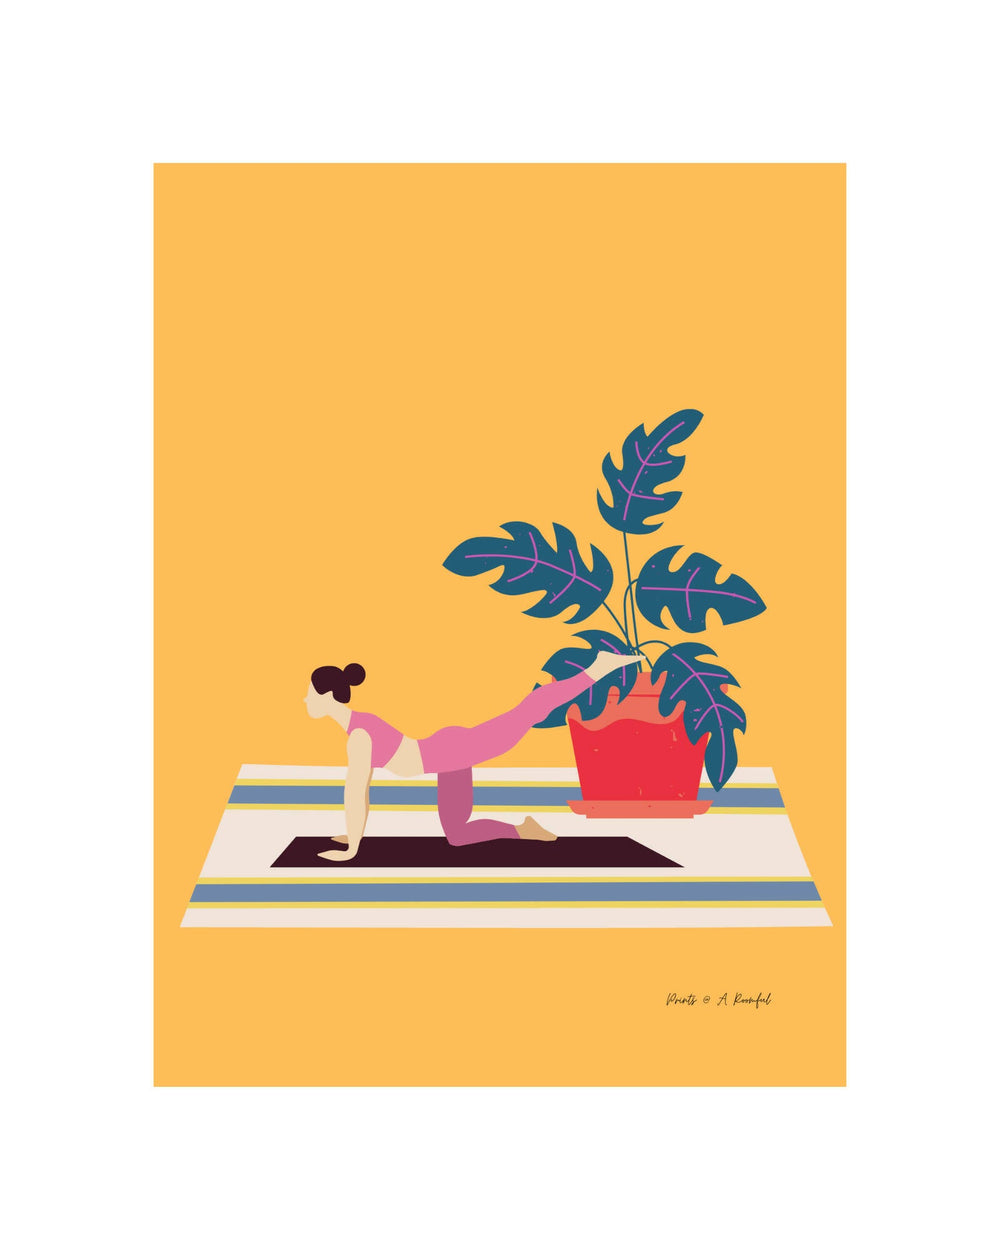 wall art : inspired by our yoga community (amber background) Art Prints@ARoomful 